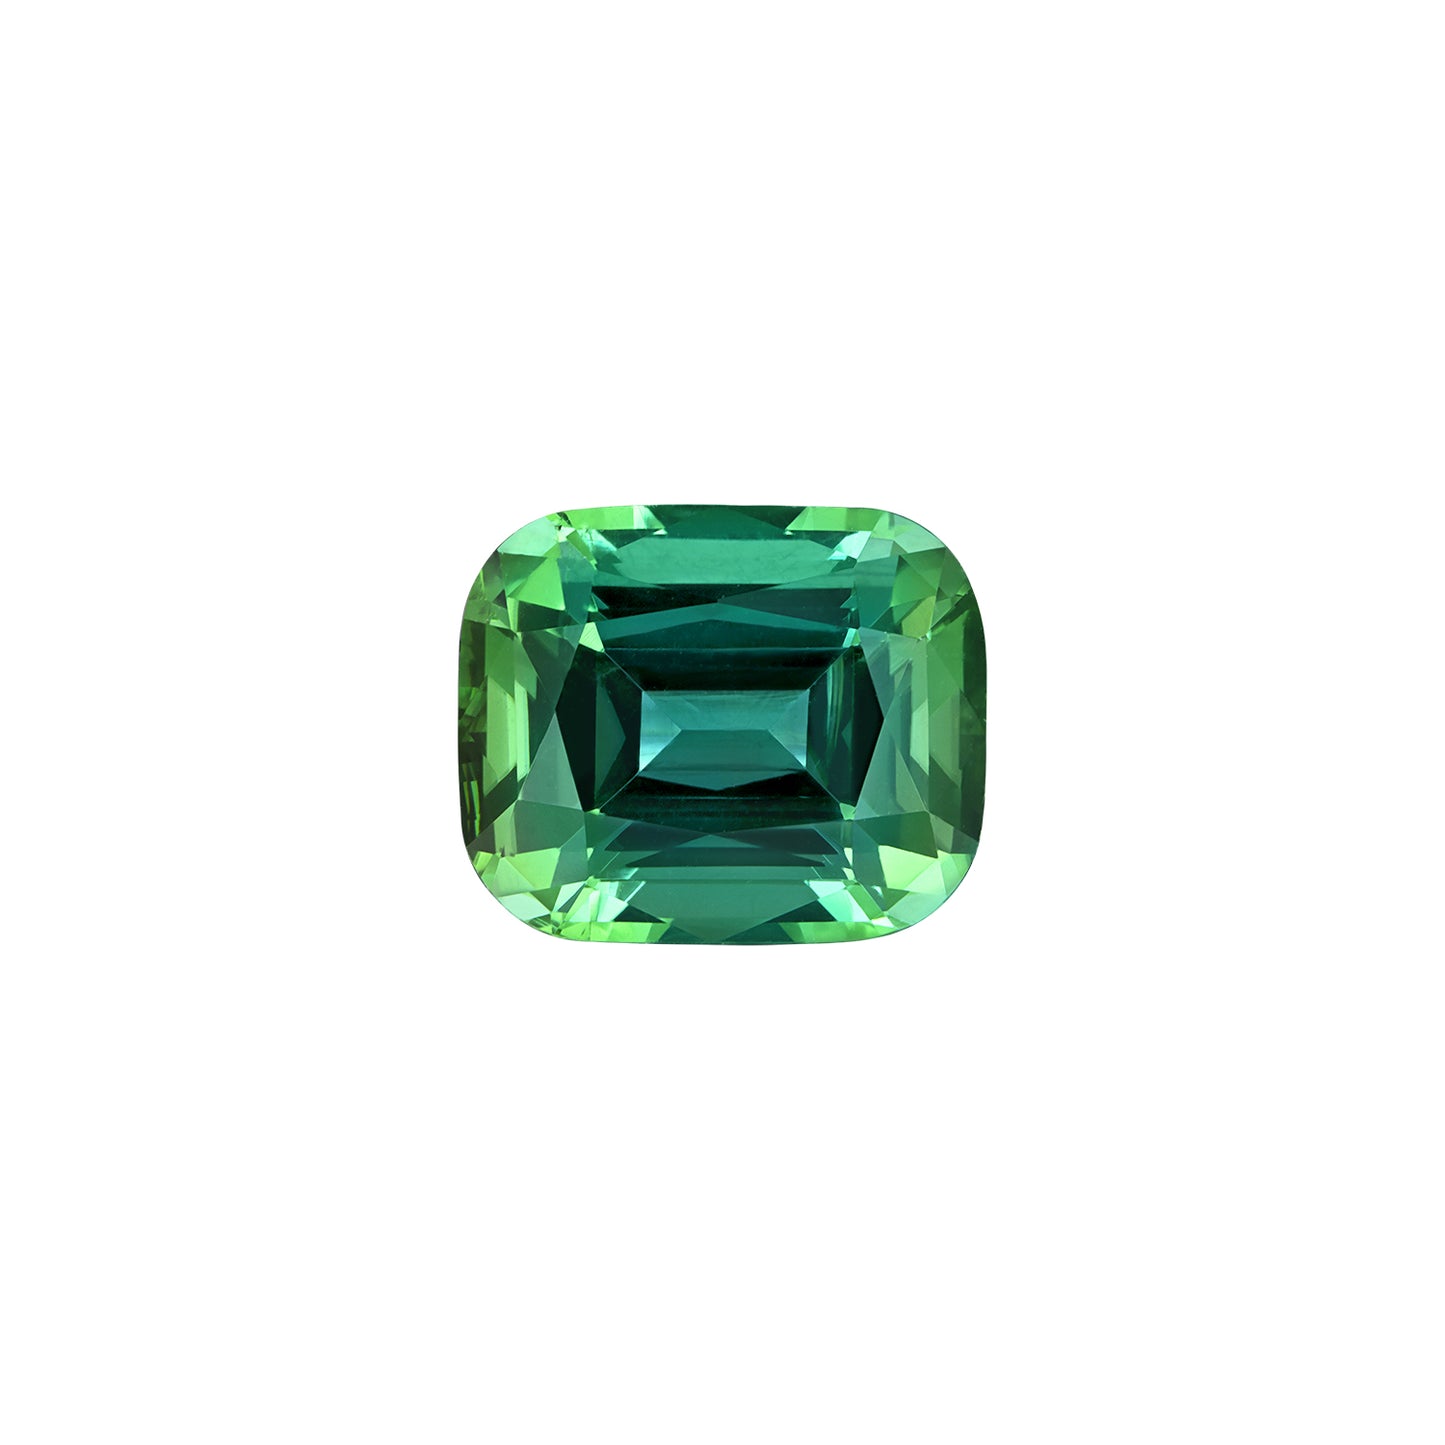 Beautiful 5.76 carat Afghan blue-green tourmaline with a glowing hue and cushion cut, perfect for adding a pop of color to any jewelry piece.